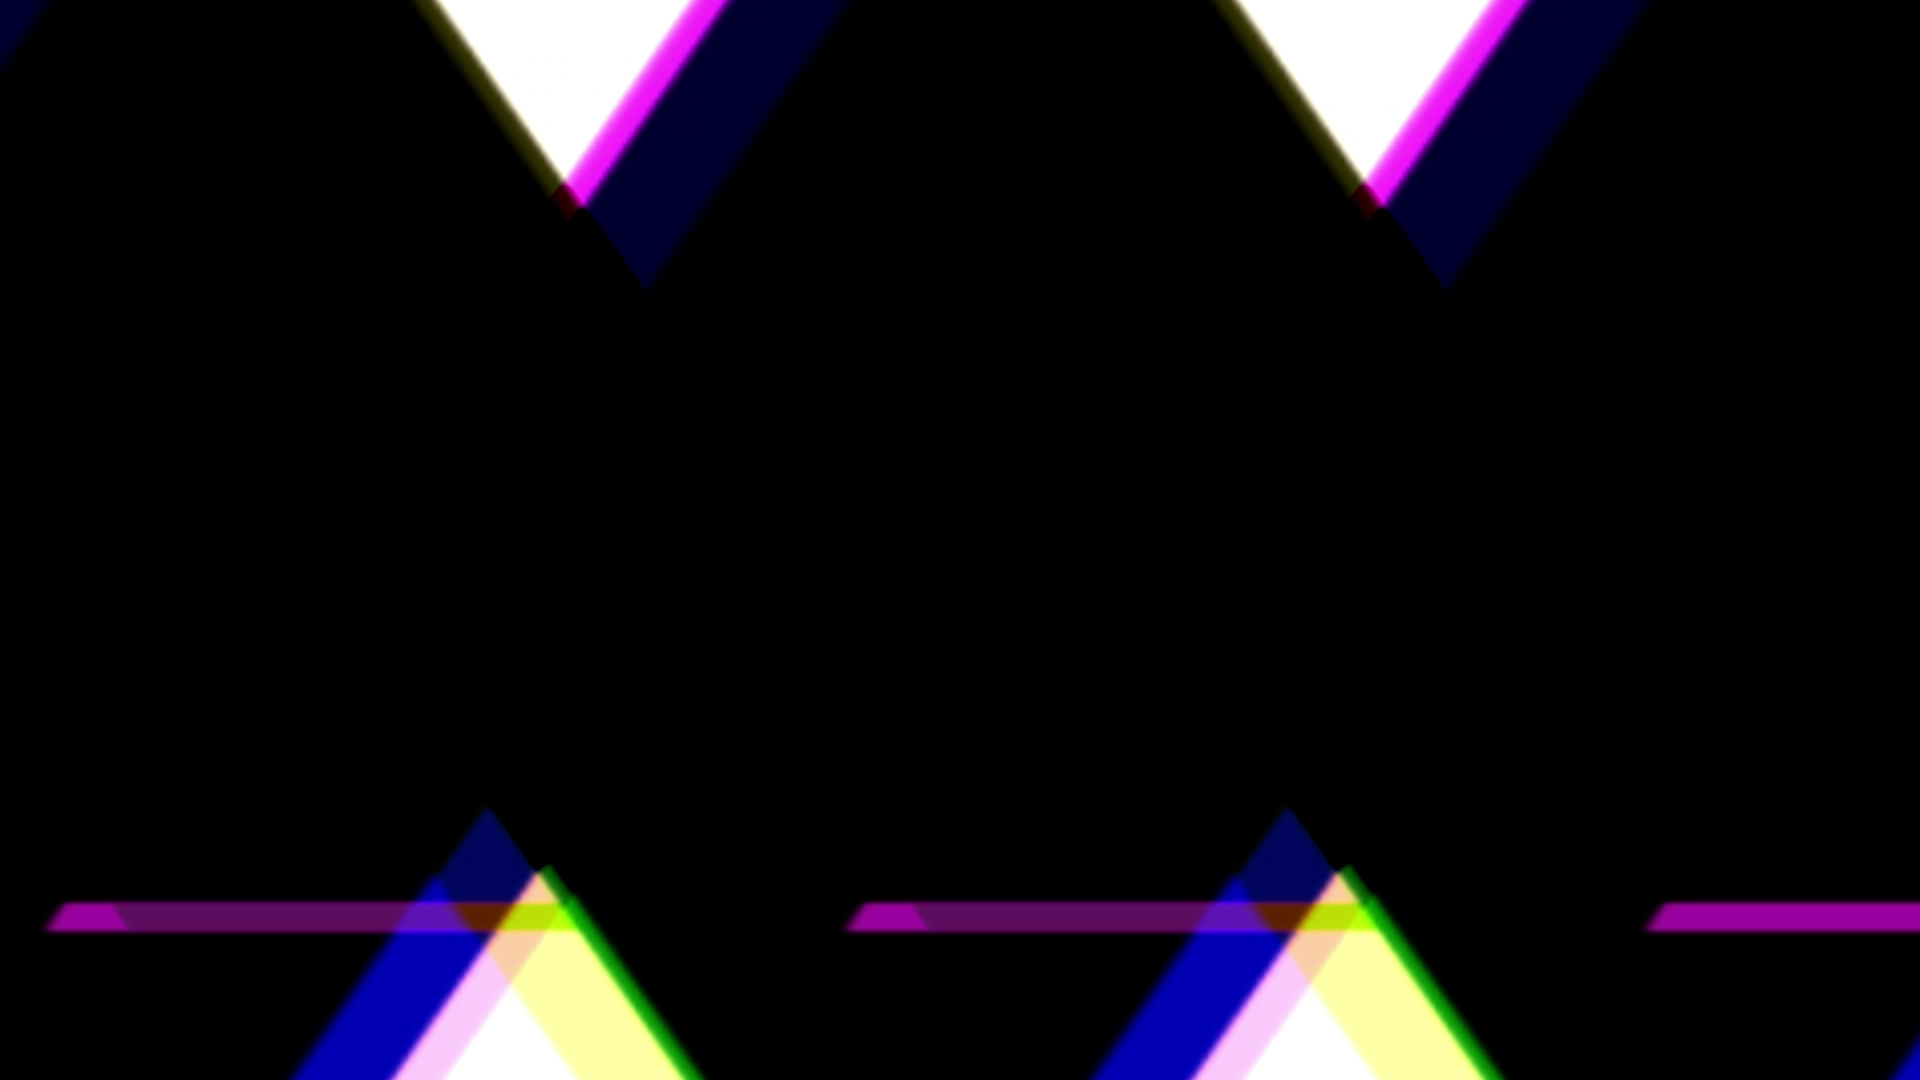 Color Split Glitch Triangles - Background / Overlay Effect Loop